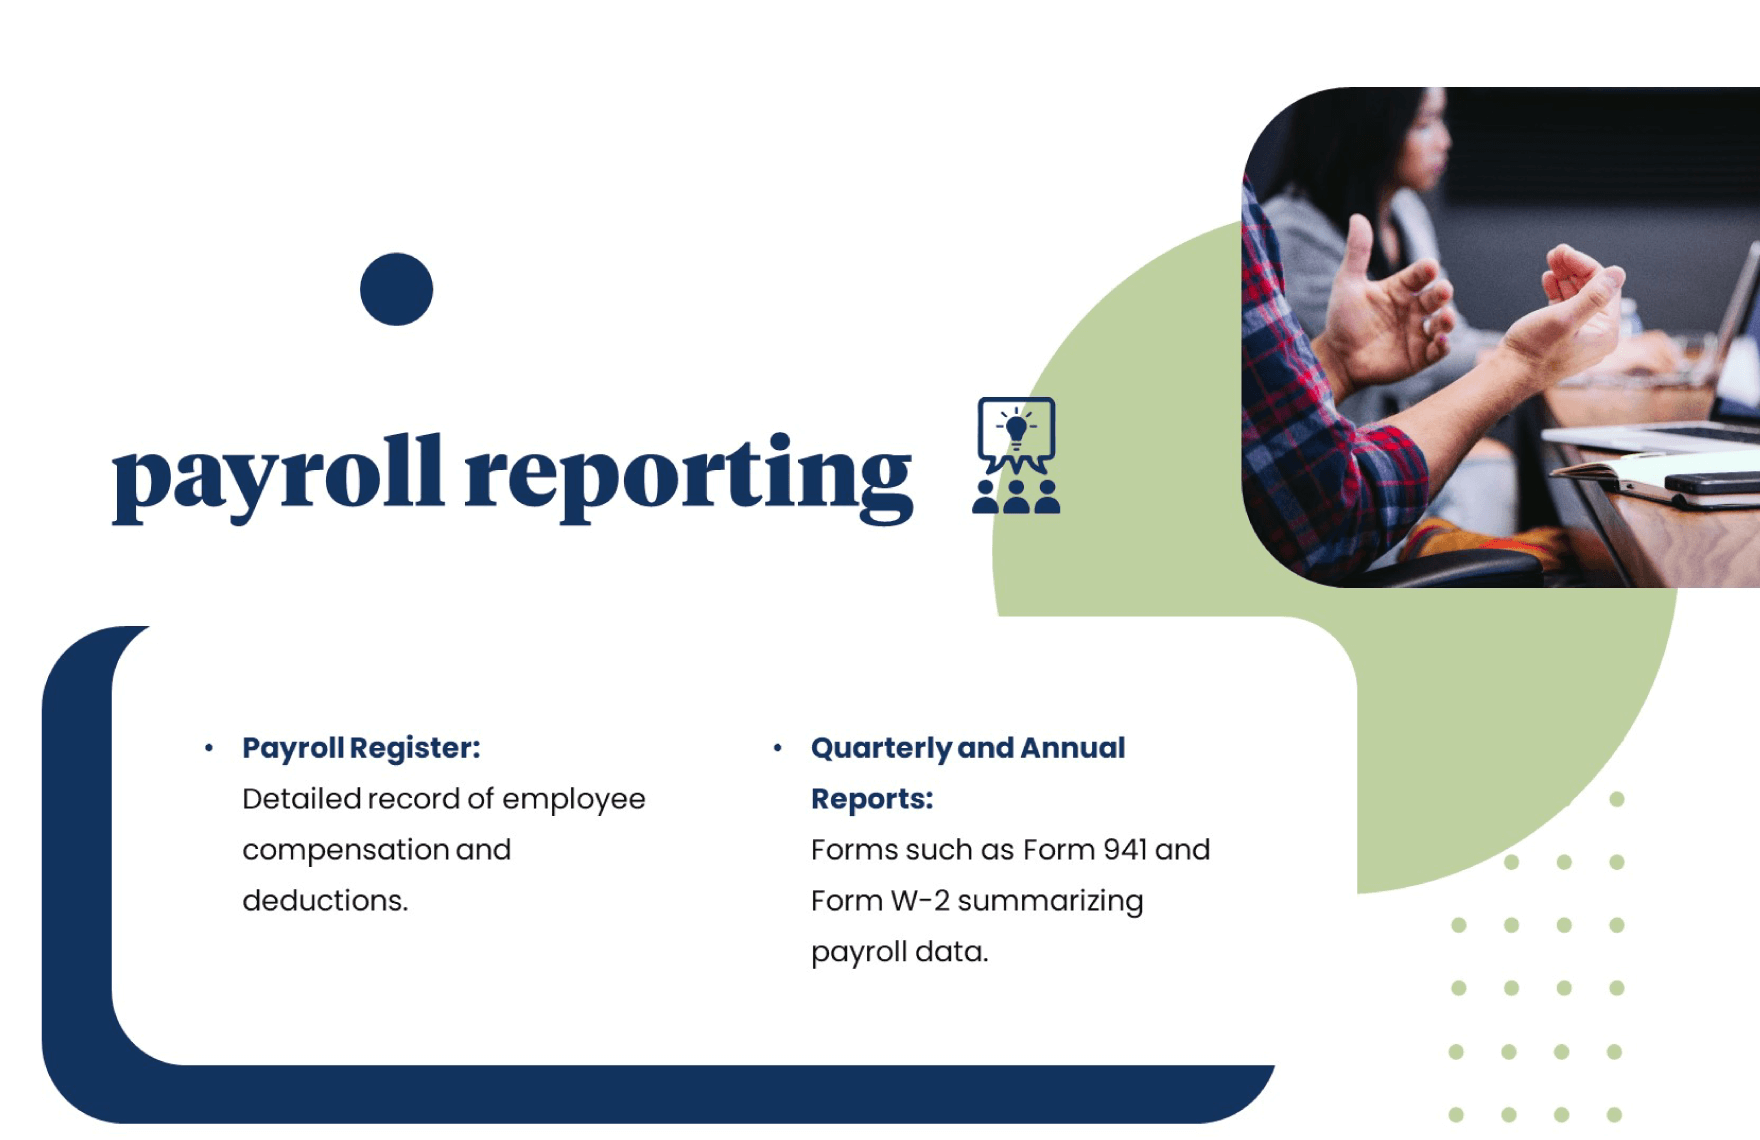 Payroll Accounting PPT Template